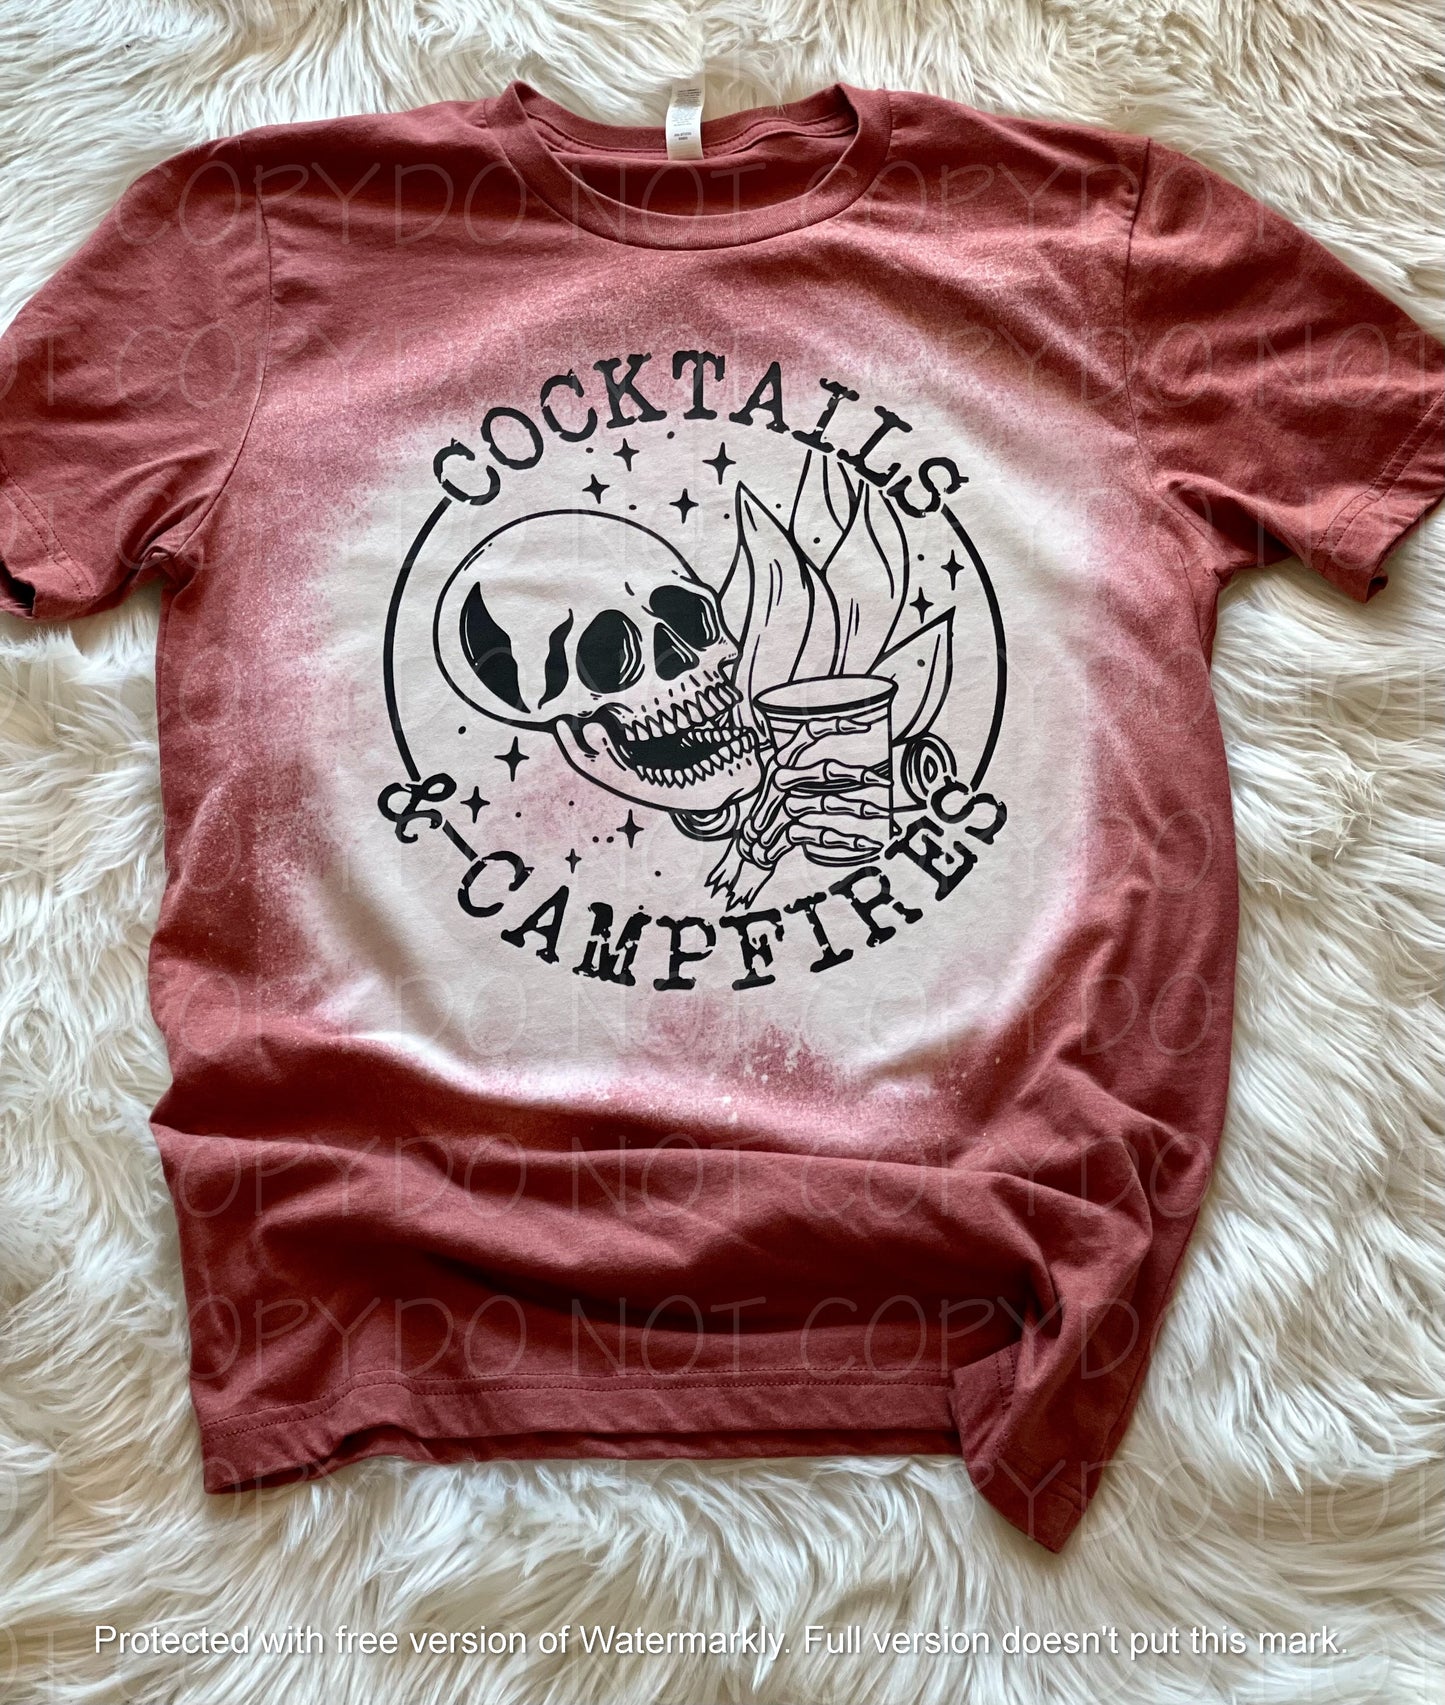 Cocktails & Campfire tee